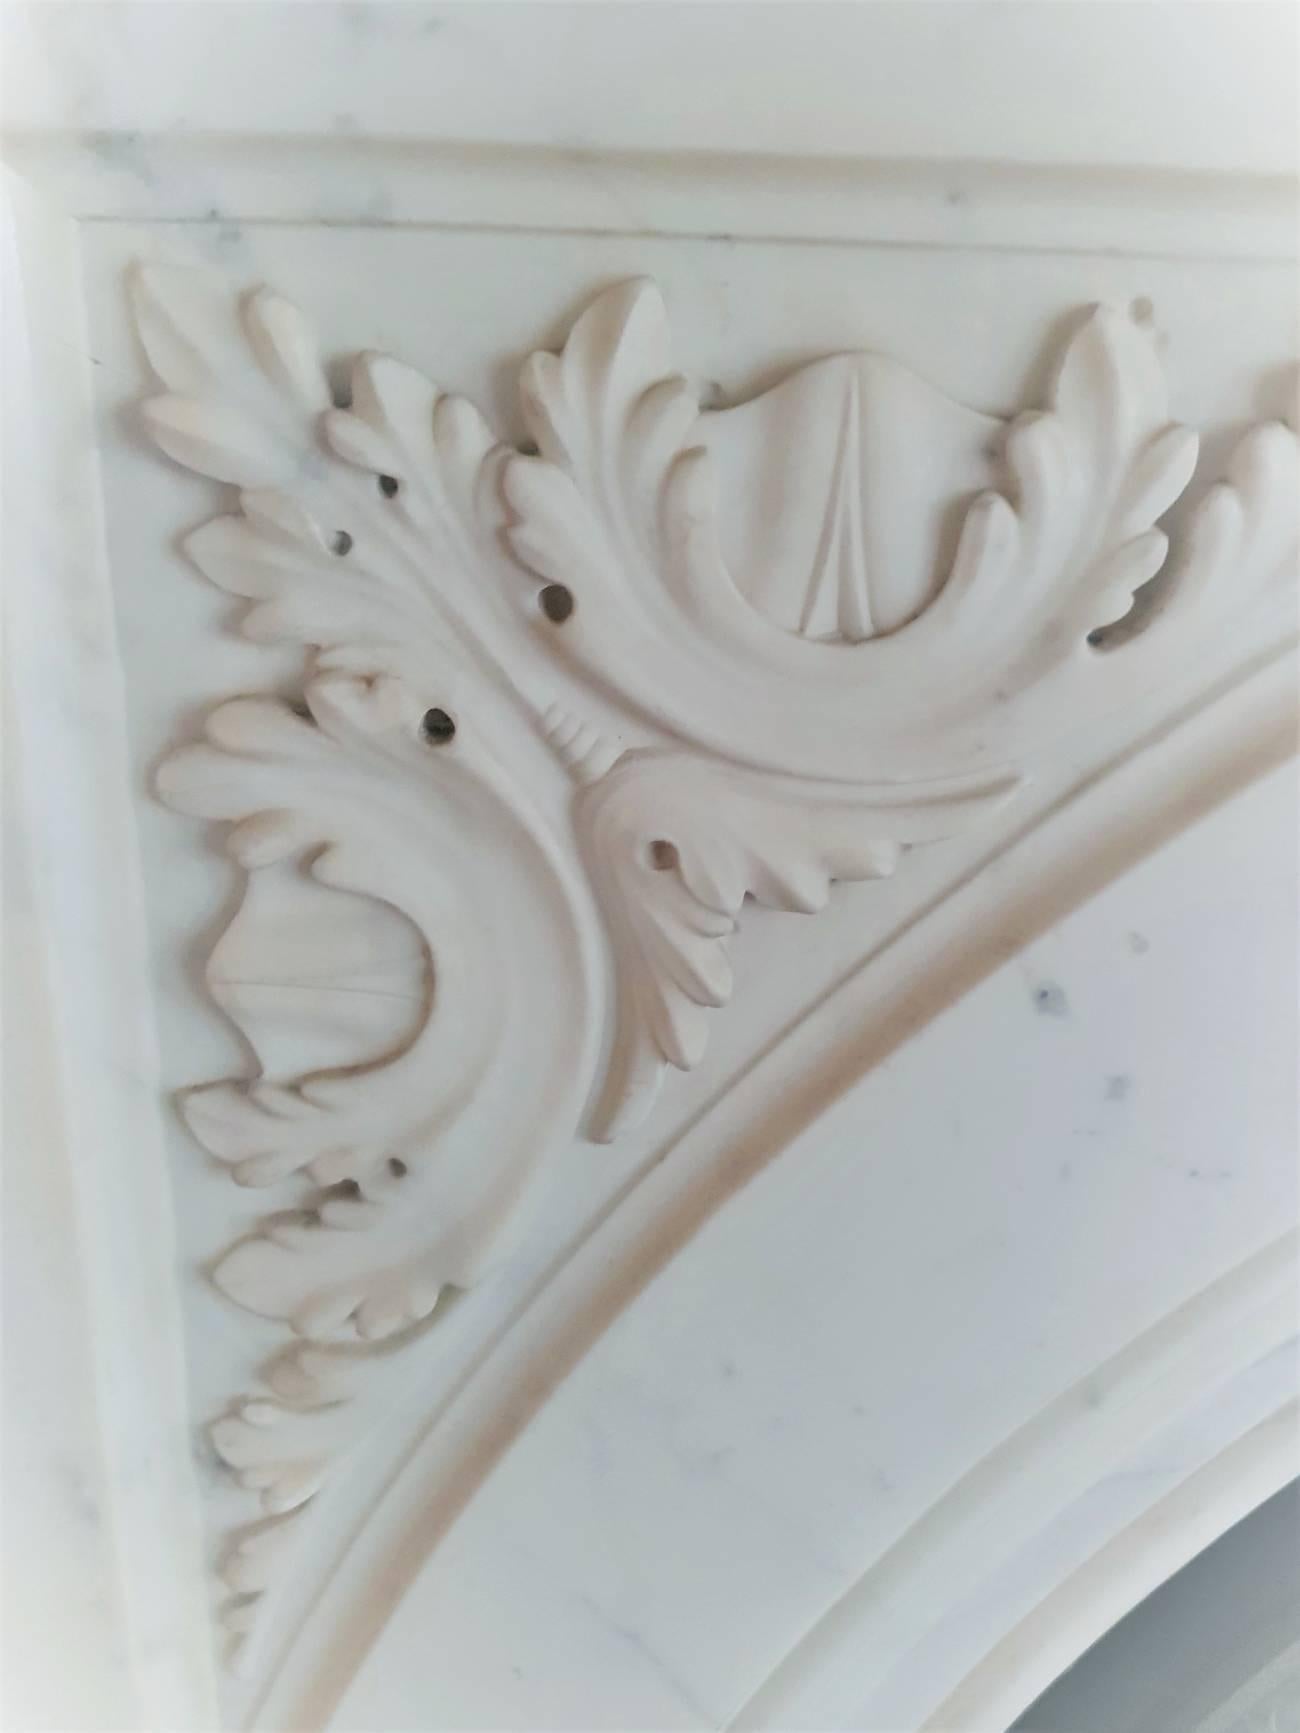 19th century restored large Victorian arched Carrara marble chimney piece, This piece is complete with its original arched cast iron fireplace insert and marble fender, date circa 1860.